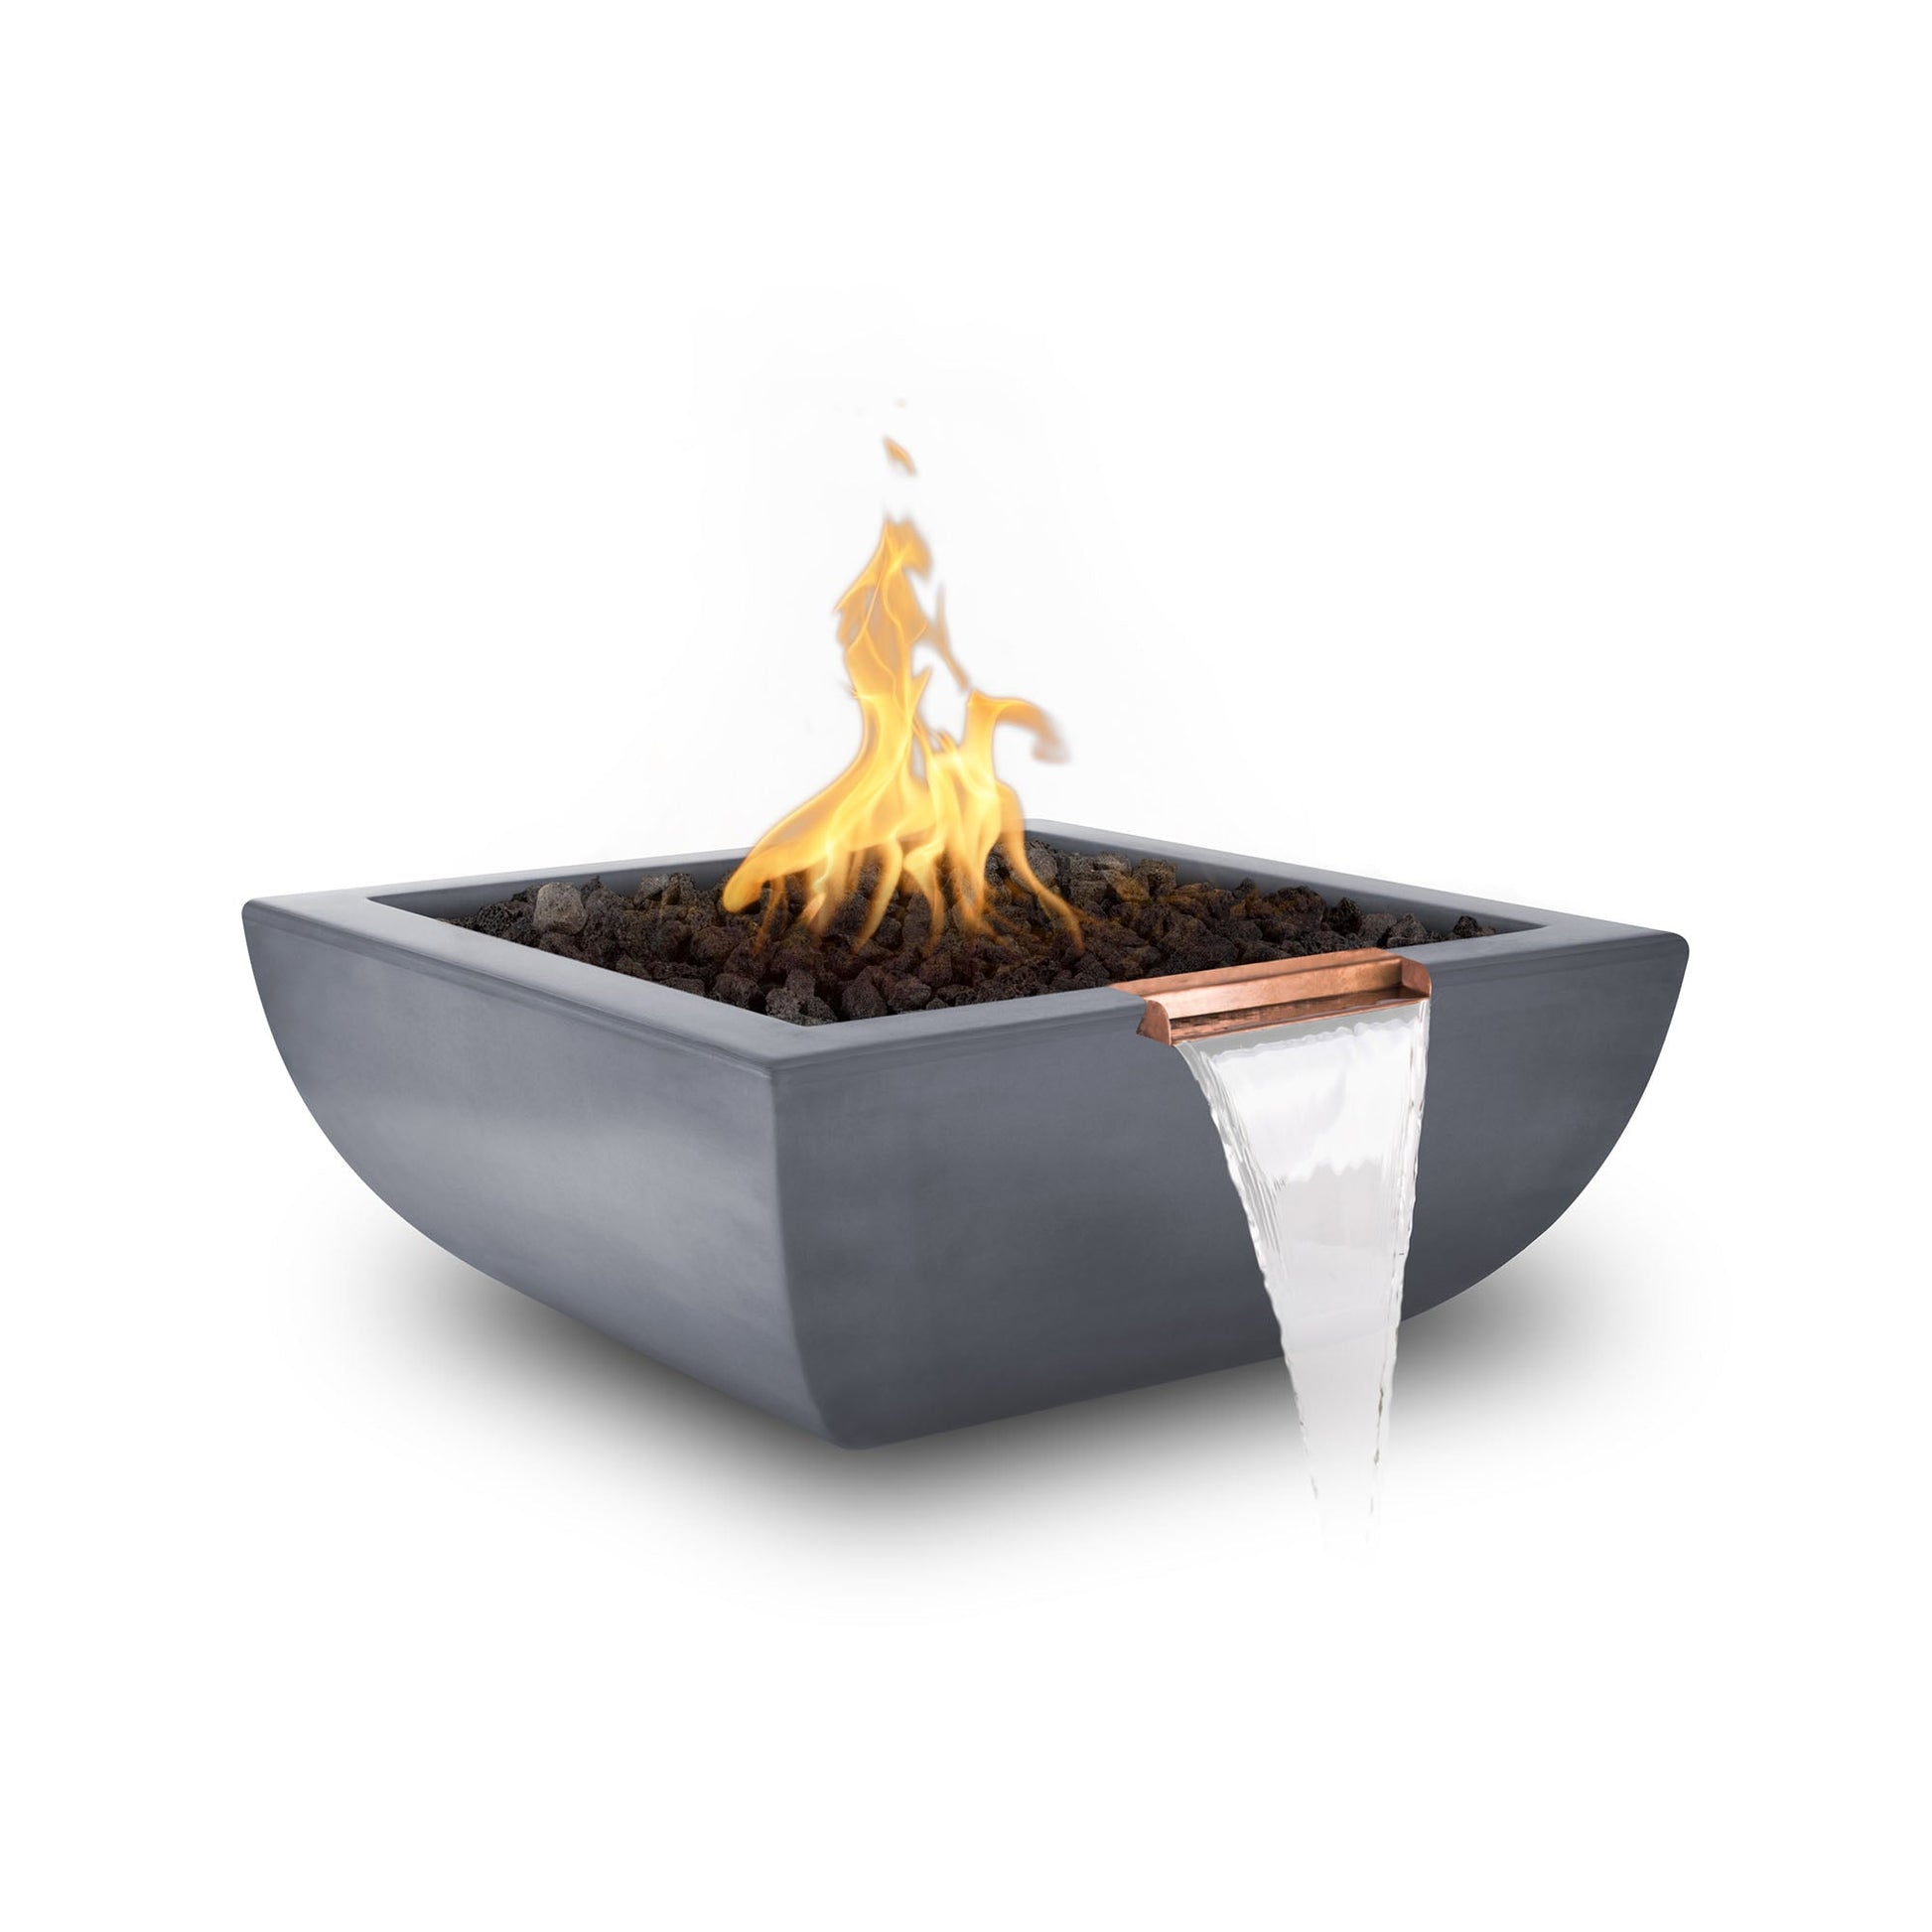 The Outdoor Plus Square Avalon 24" Metallic Silver GFRC Concrete Liquid Propane Fire & Water Bowl with Match Lit with Flame Sense Ignition